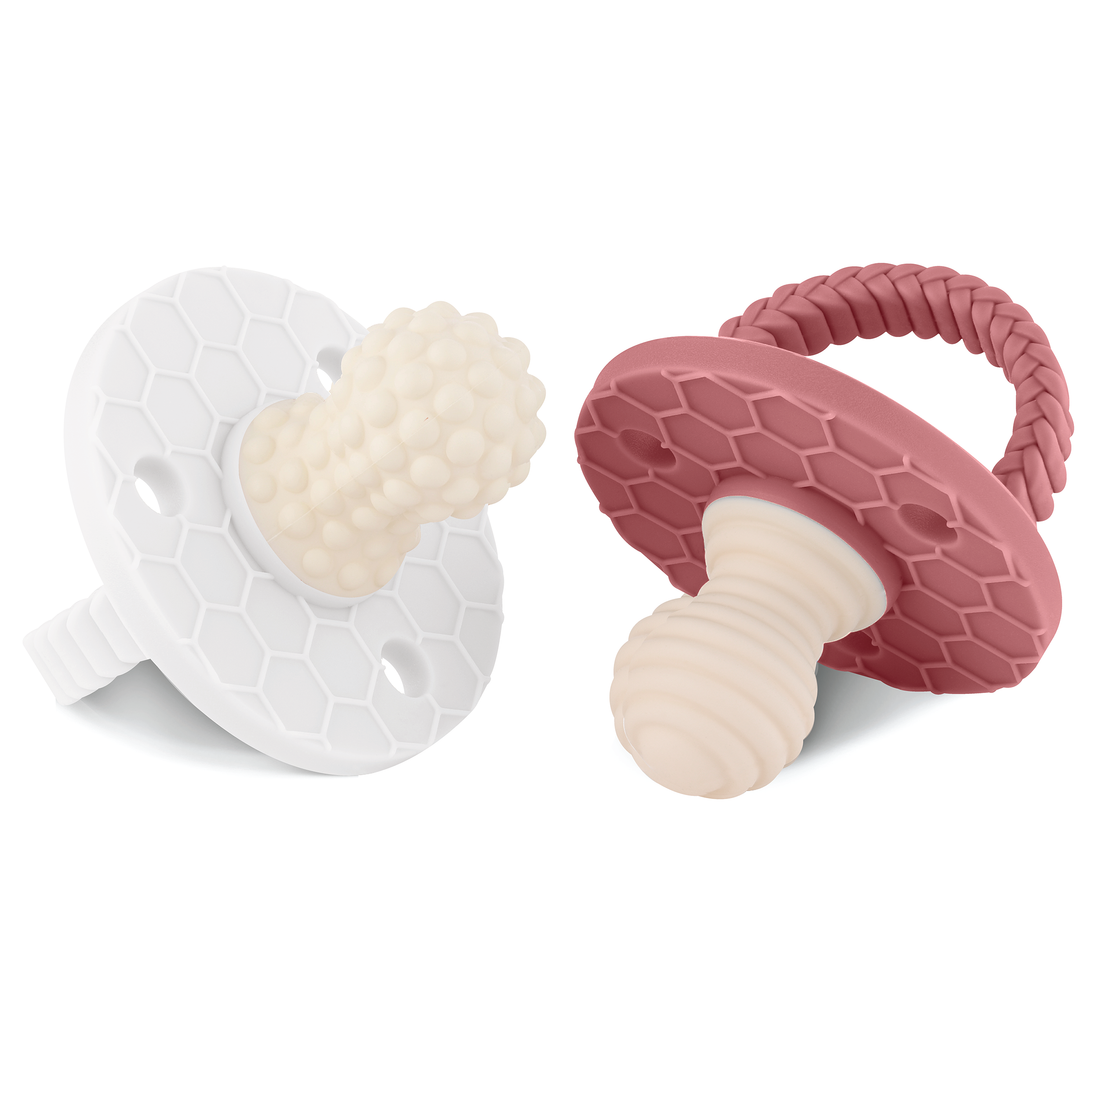 SoothiPop Silicone Teething Pacifier Round Shaped (2 Pack) - Blush and White by Smooch Babies sold by Smooch Babies